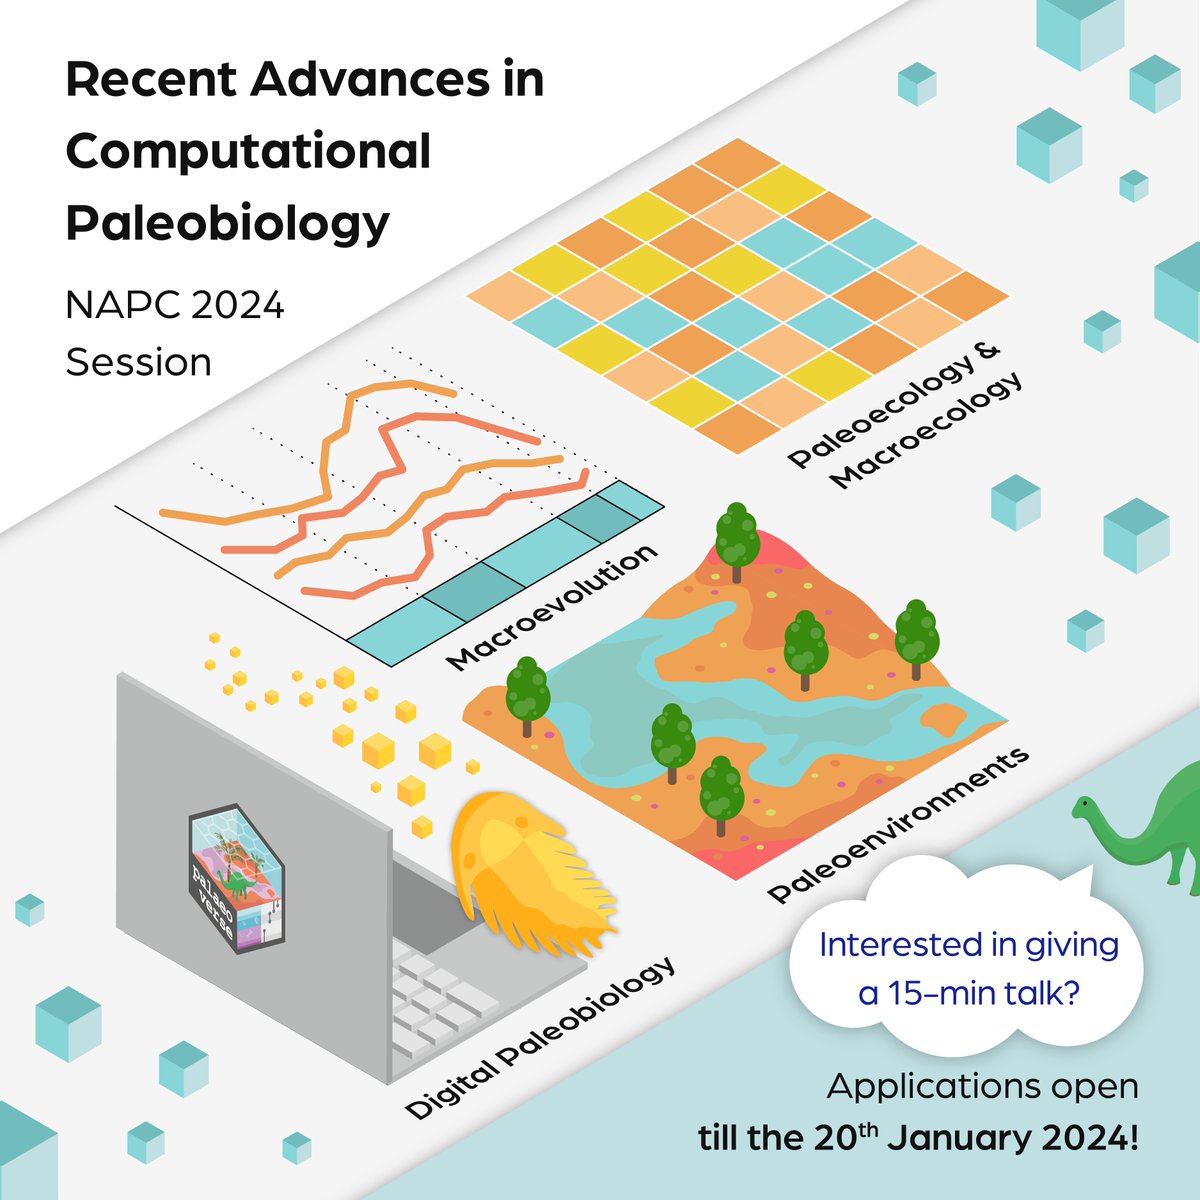 📢Are you on the cutting edge of the development and/or application of new methods in #computational #paleobiology 💻🐚🦴? Submit an abstract to our #NAPC2024 session 'Recent Advances in Computational Paleobiology'!

Submissions are open until January 20:
sites.lsa.umich.edu/napc2024/prepa…